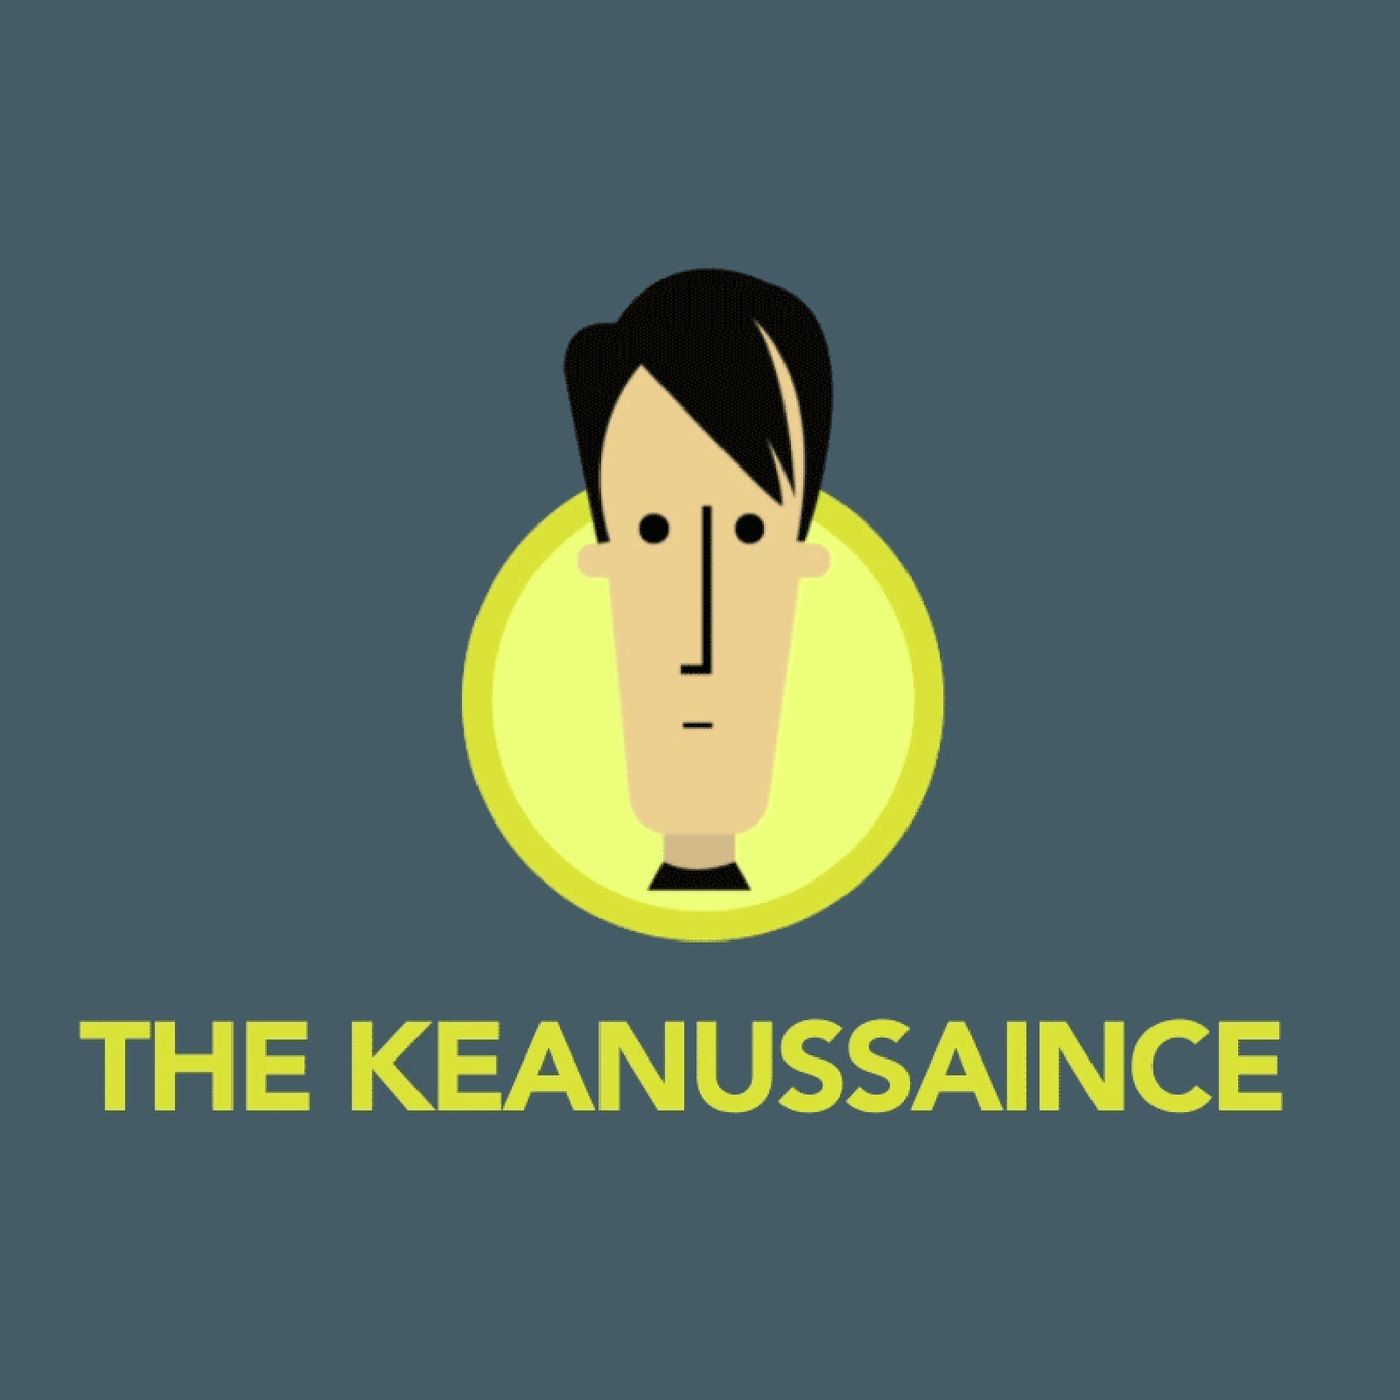 STORM OF SPOILERS TOUR: The Keanussaince